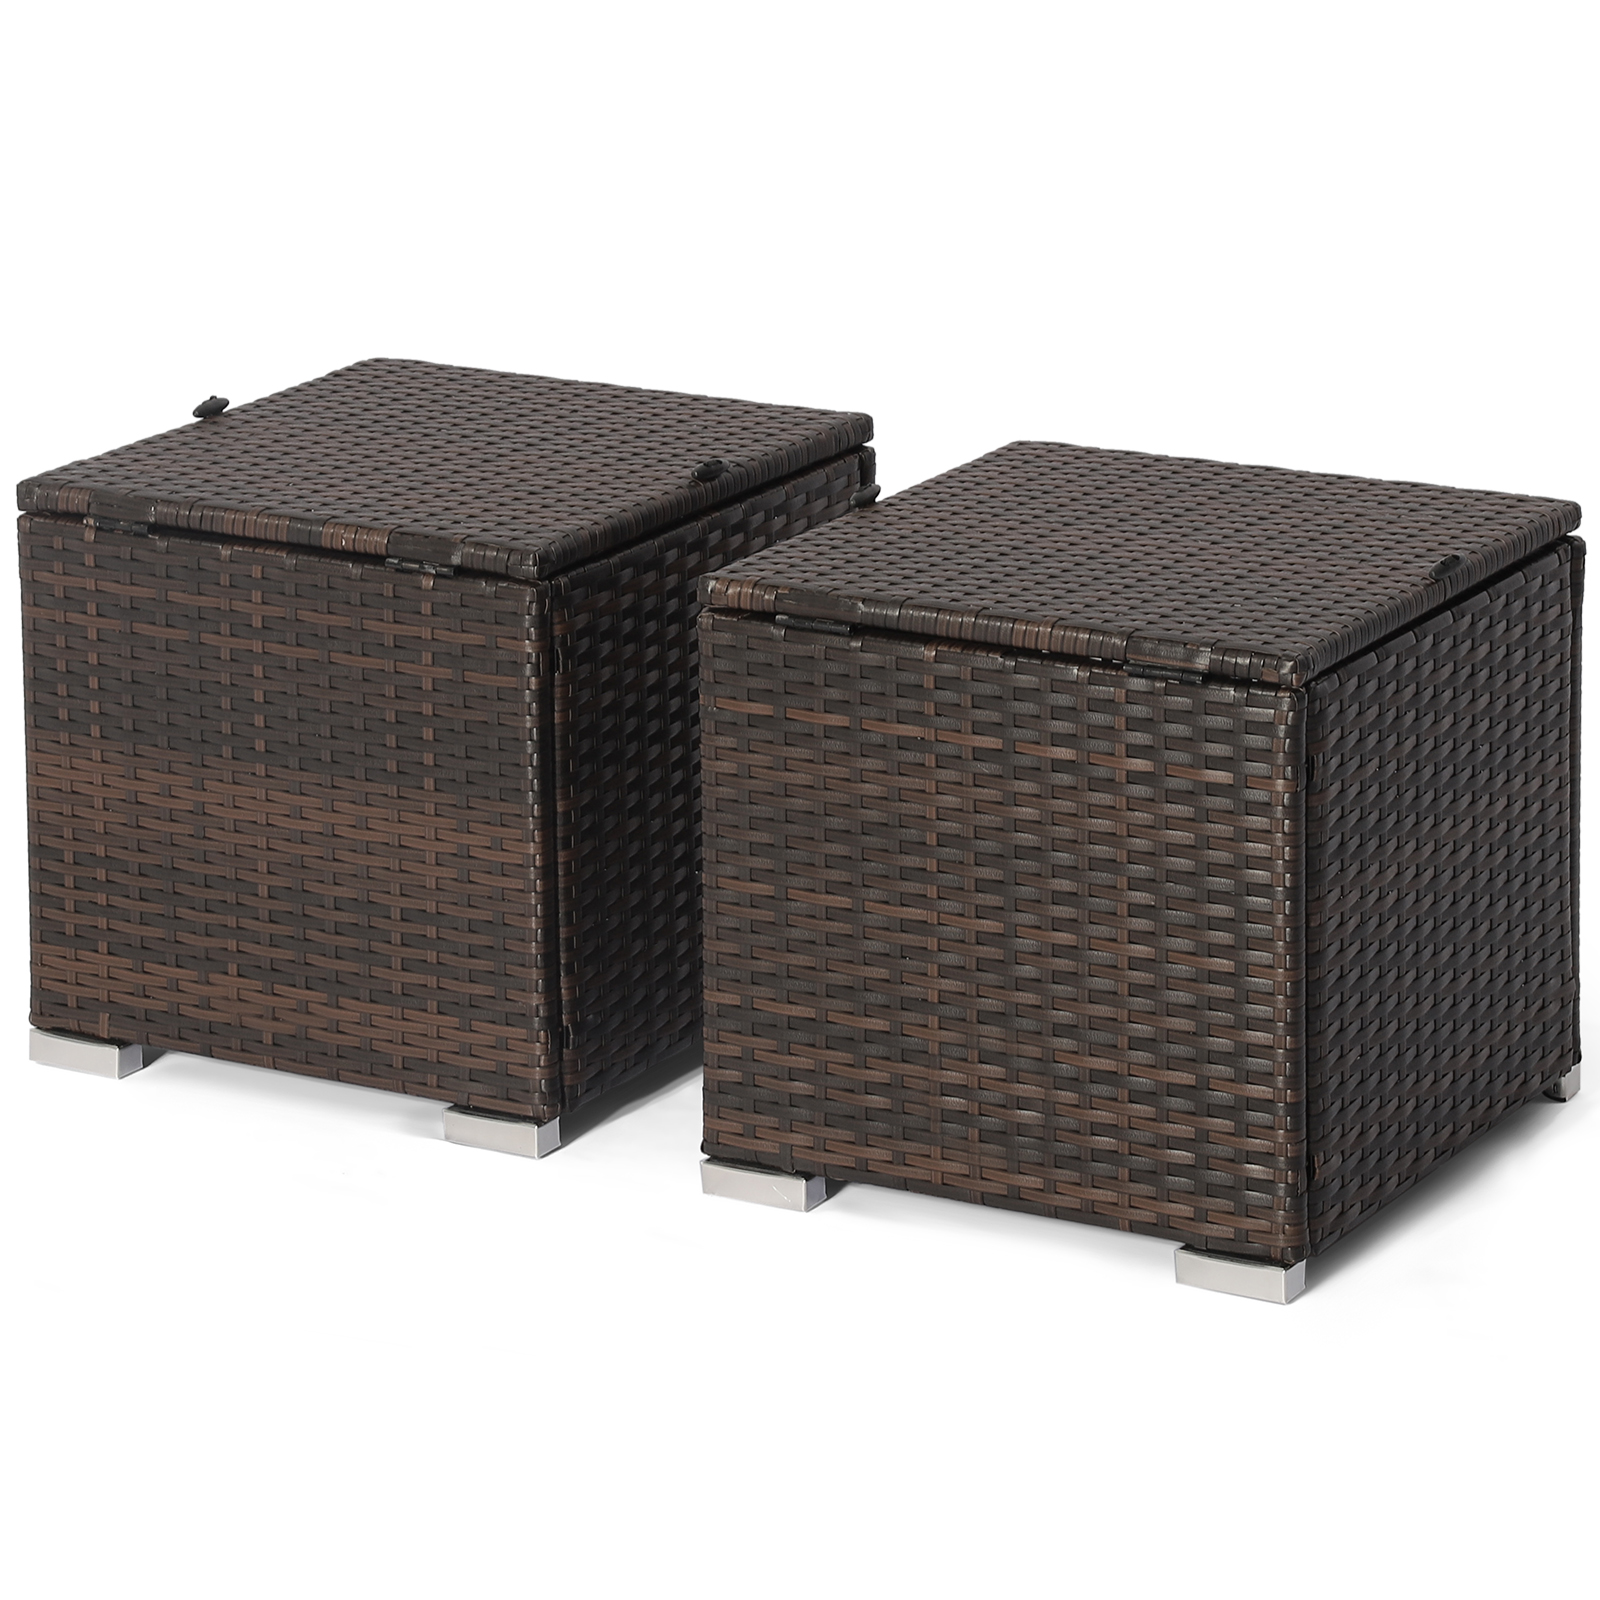 Topbuy 2 Pieces Patio Ottoman Multipurpose Outdoor Wicker Footstool Storage Box Side Table w/ Solid Metal Frame w/ Removable Cushions Off White - image 4 of 7